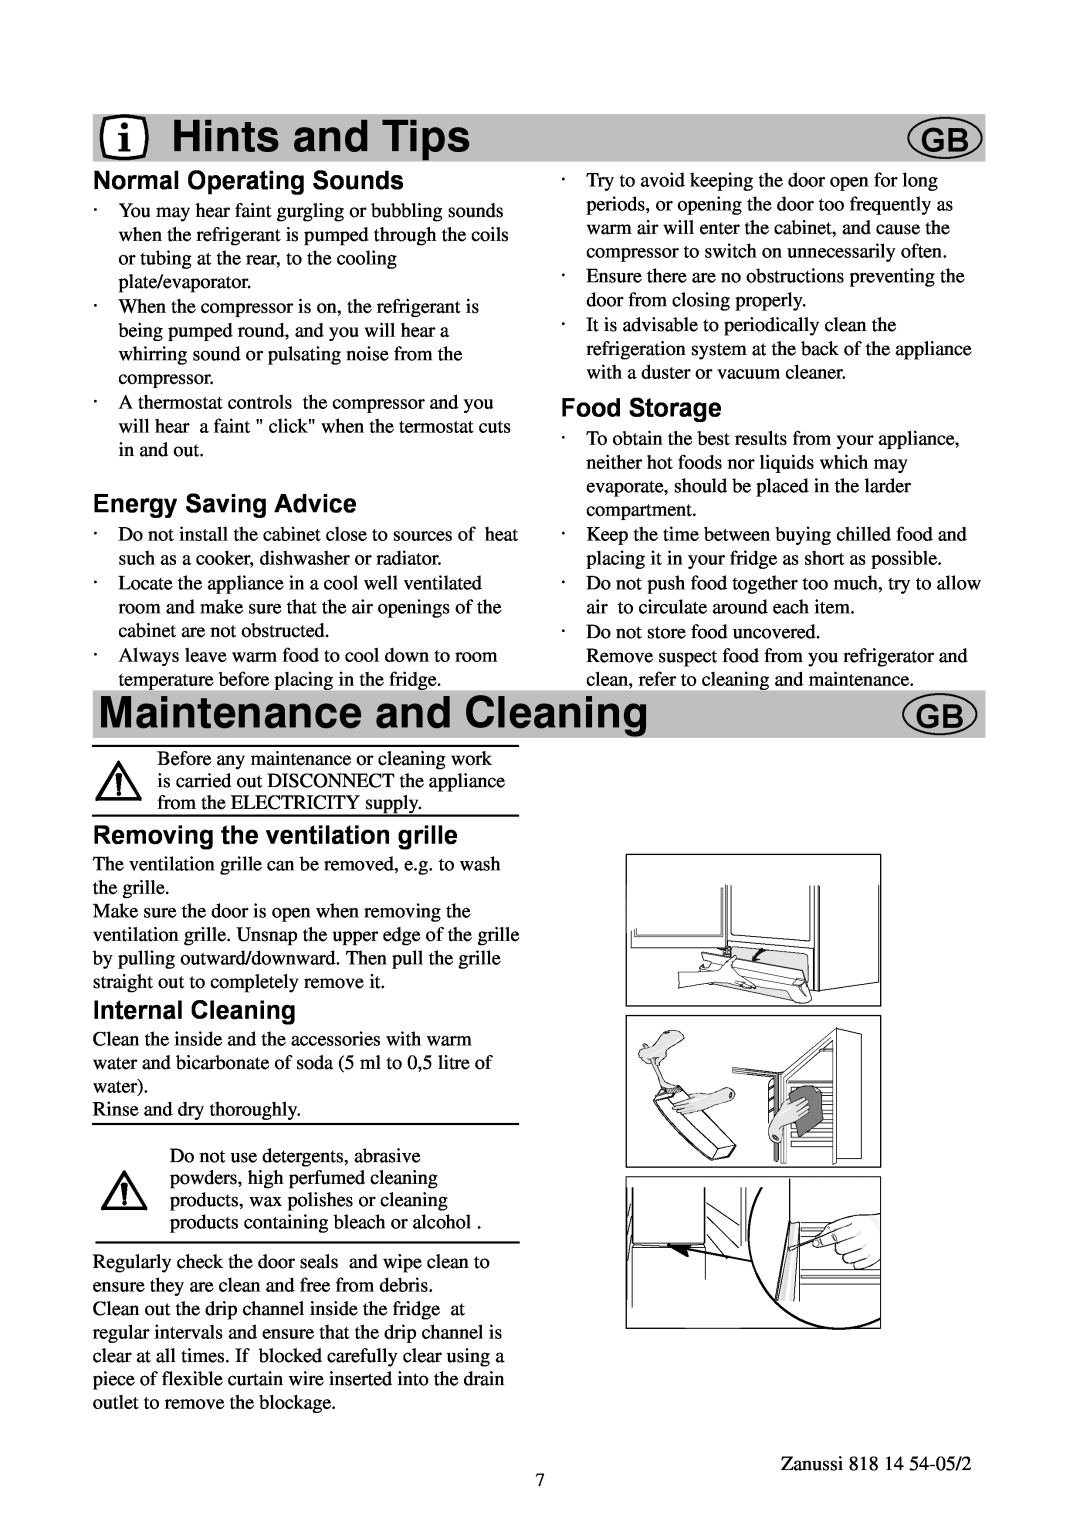 Zanussi ZL714W manual Hints and Tips, Maintenance and Cleaning, Normal Operating Sounds, Food Storage, Energy Saving Advice 